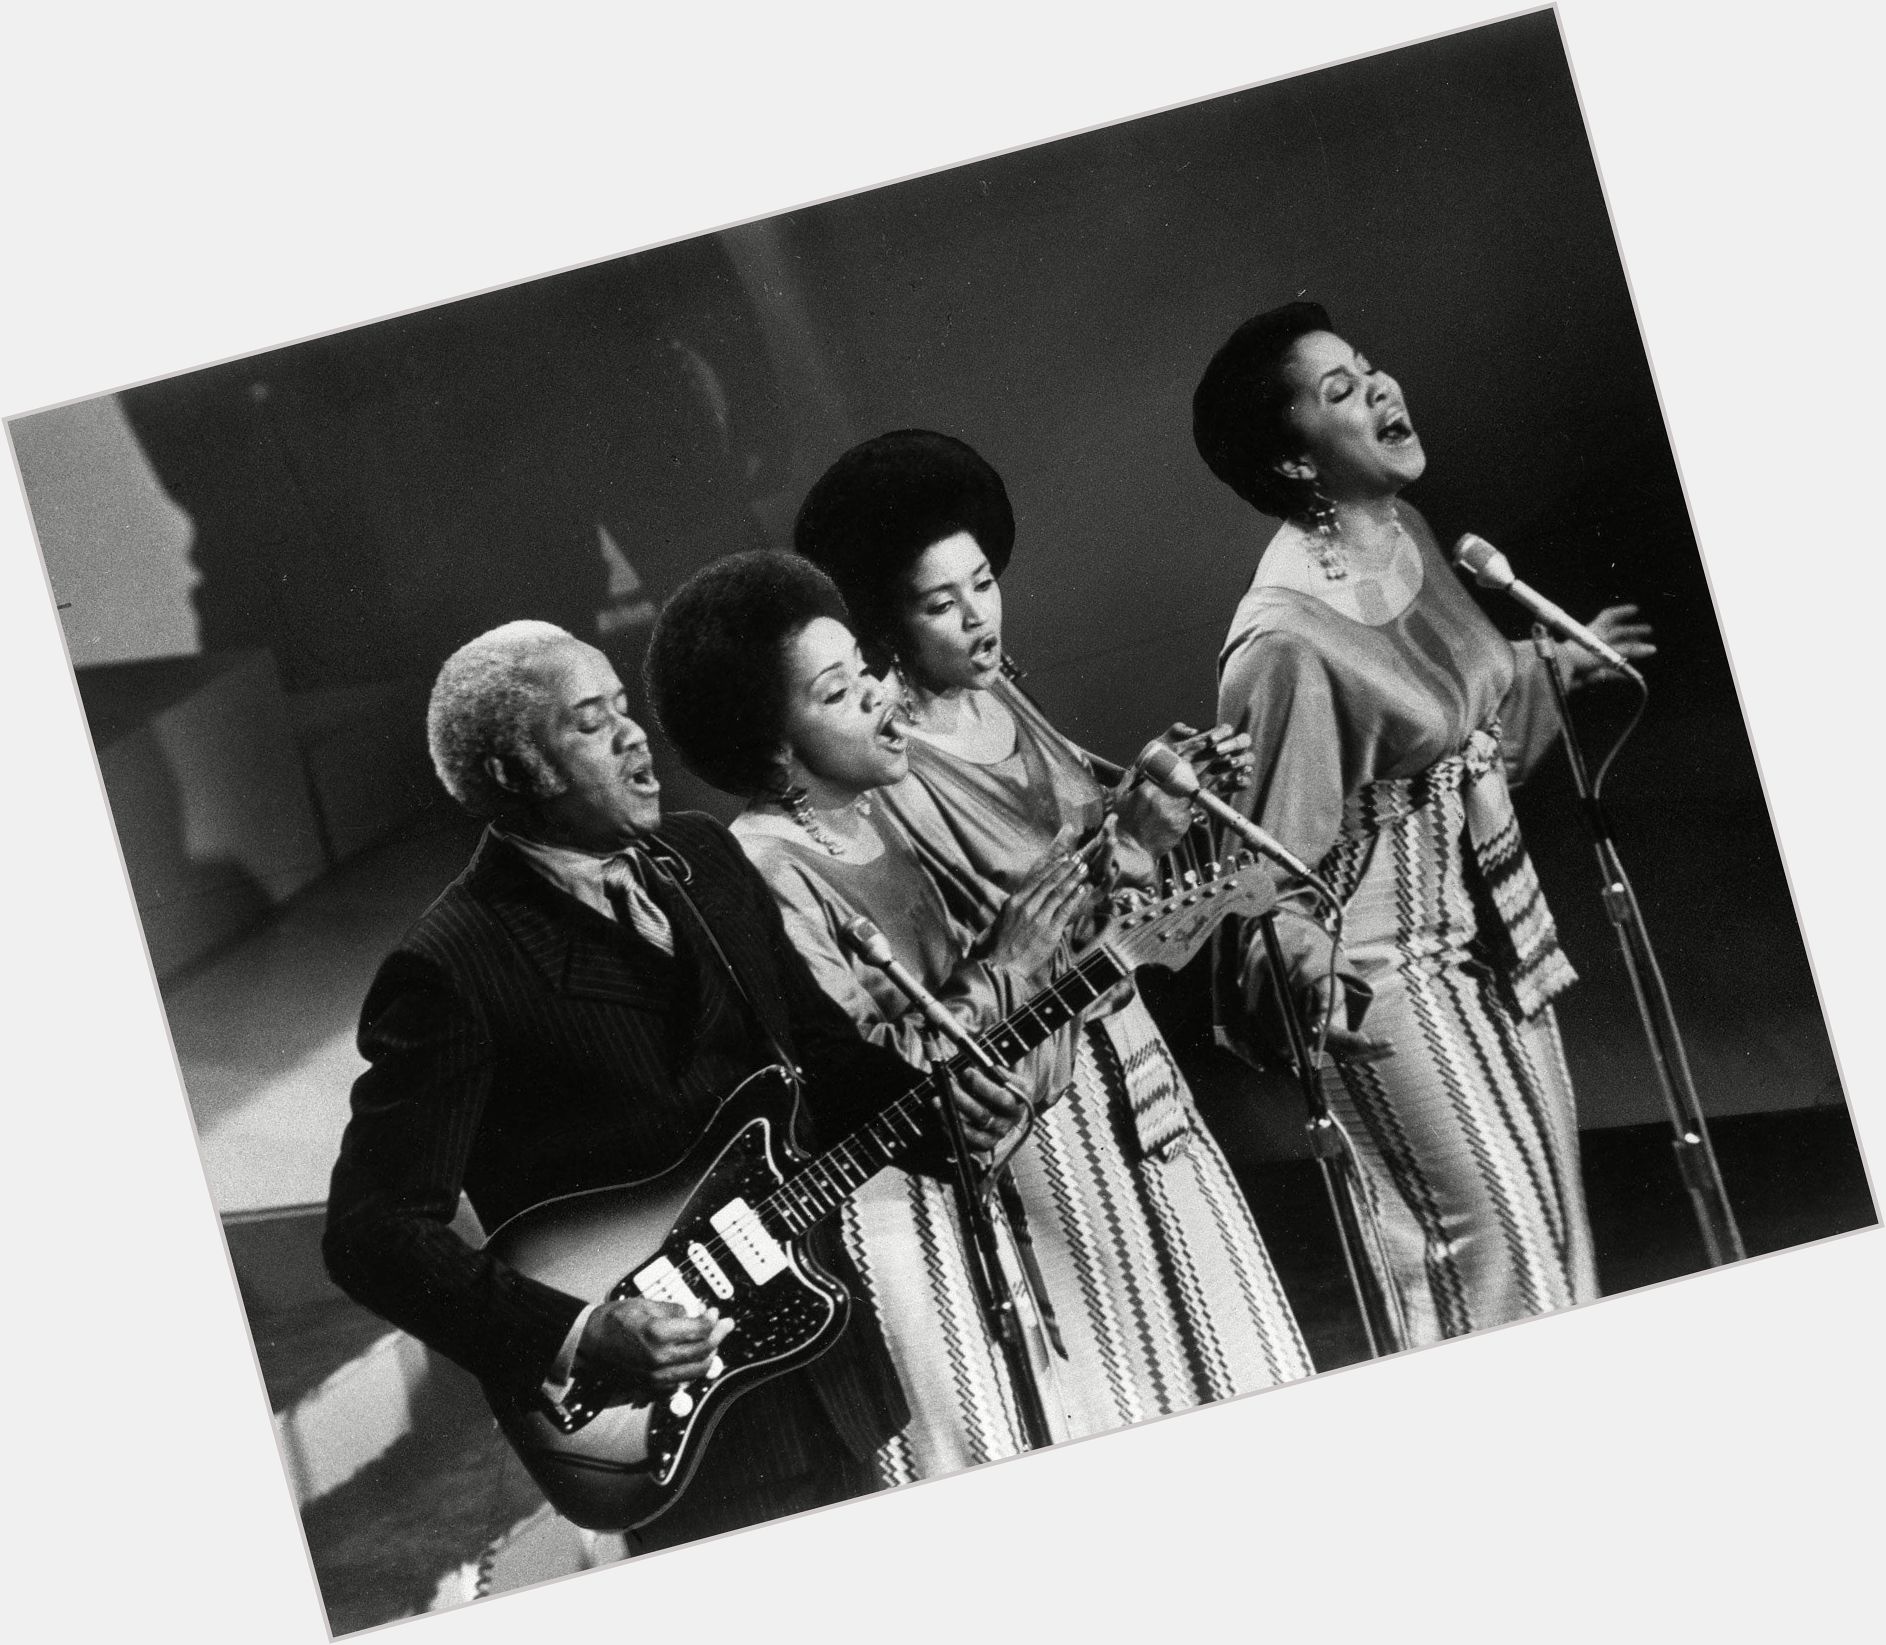 <a href="/hot-men/the-staple-singers/is-he-where-what-best-album-low-way">The Staple Singers</a>  